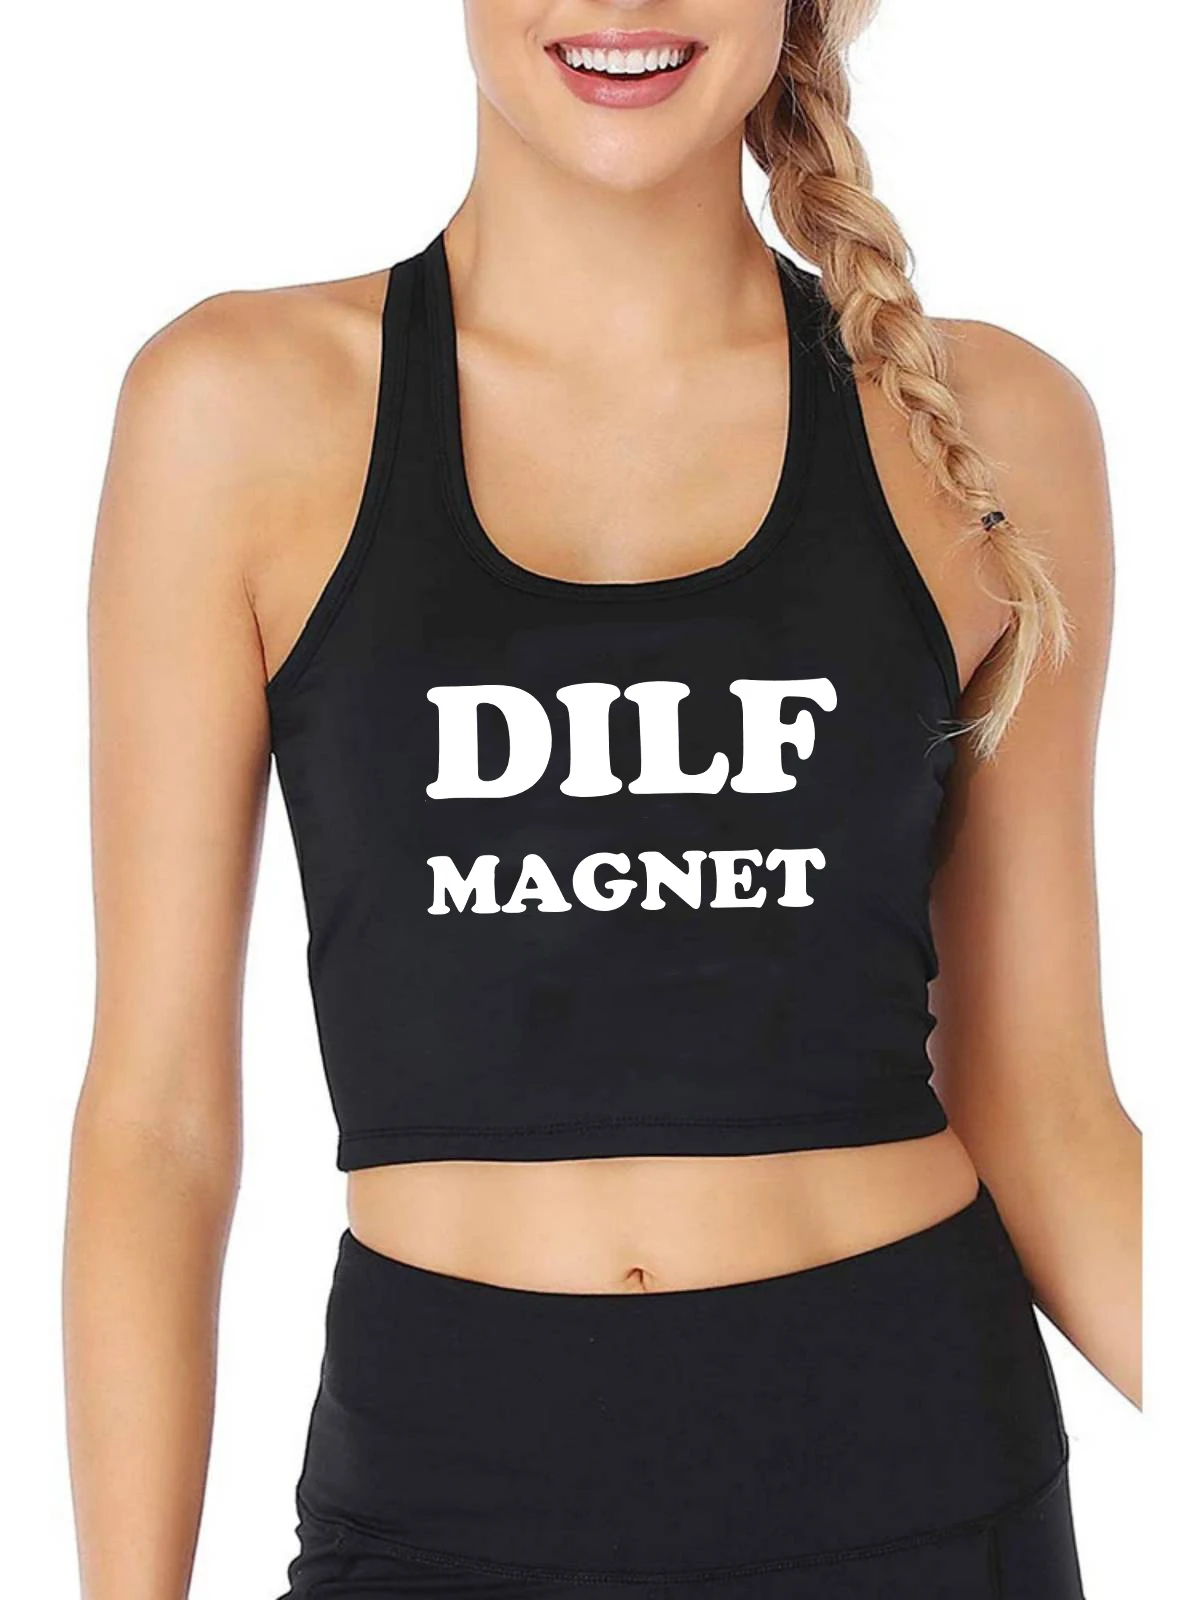 

DILF Magnet Graphic Sexy Slim Fit Crop Top Hot Dad Hunter Humorous Flirtation Style Tank Tops Swinger Naughty Camisole